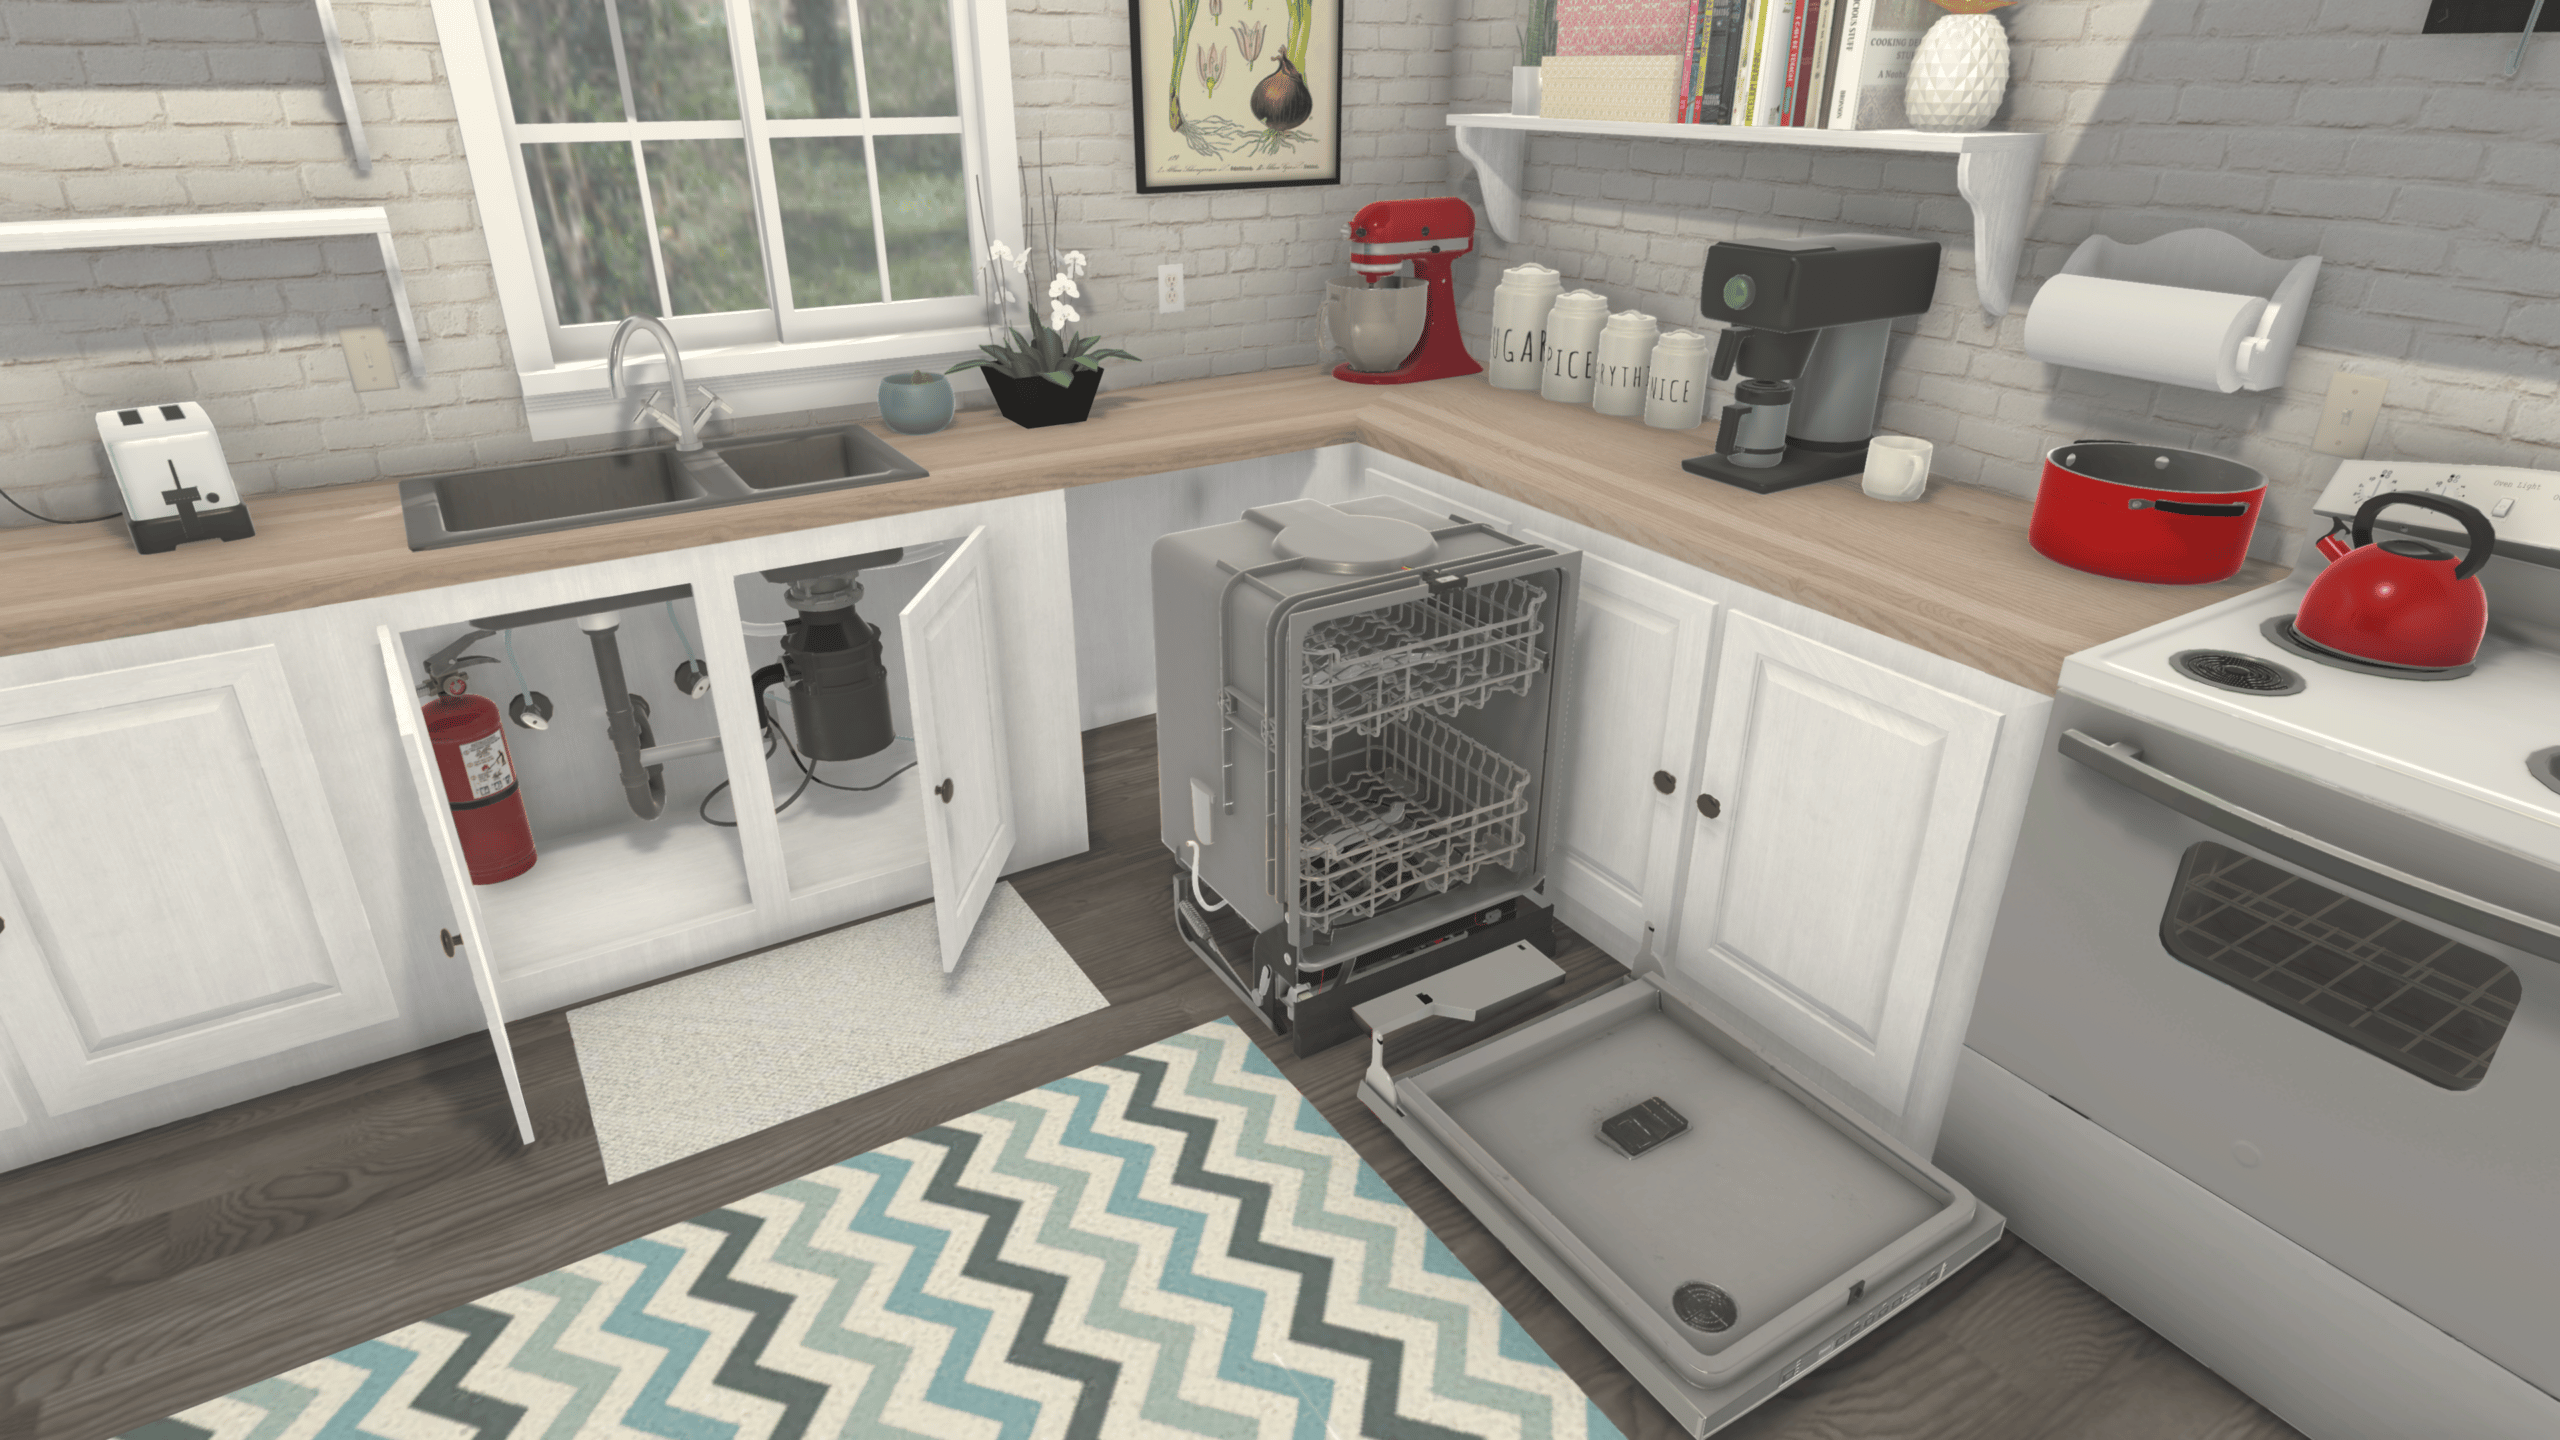 A kitchen with a stove, dishwasher, and oven.